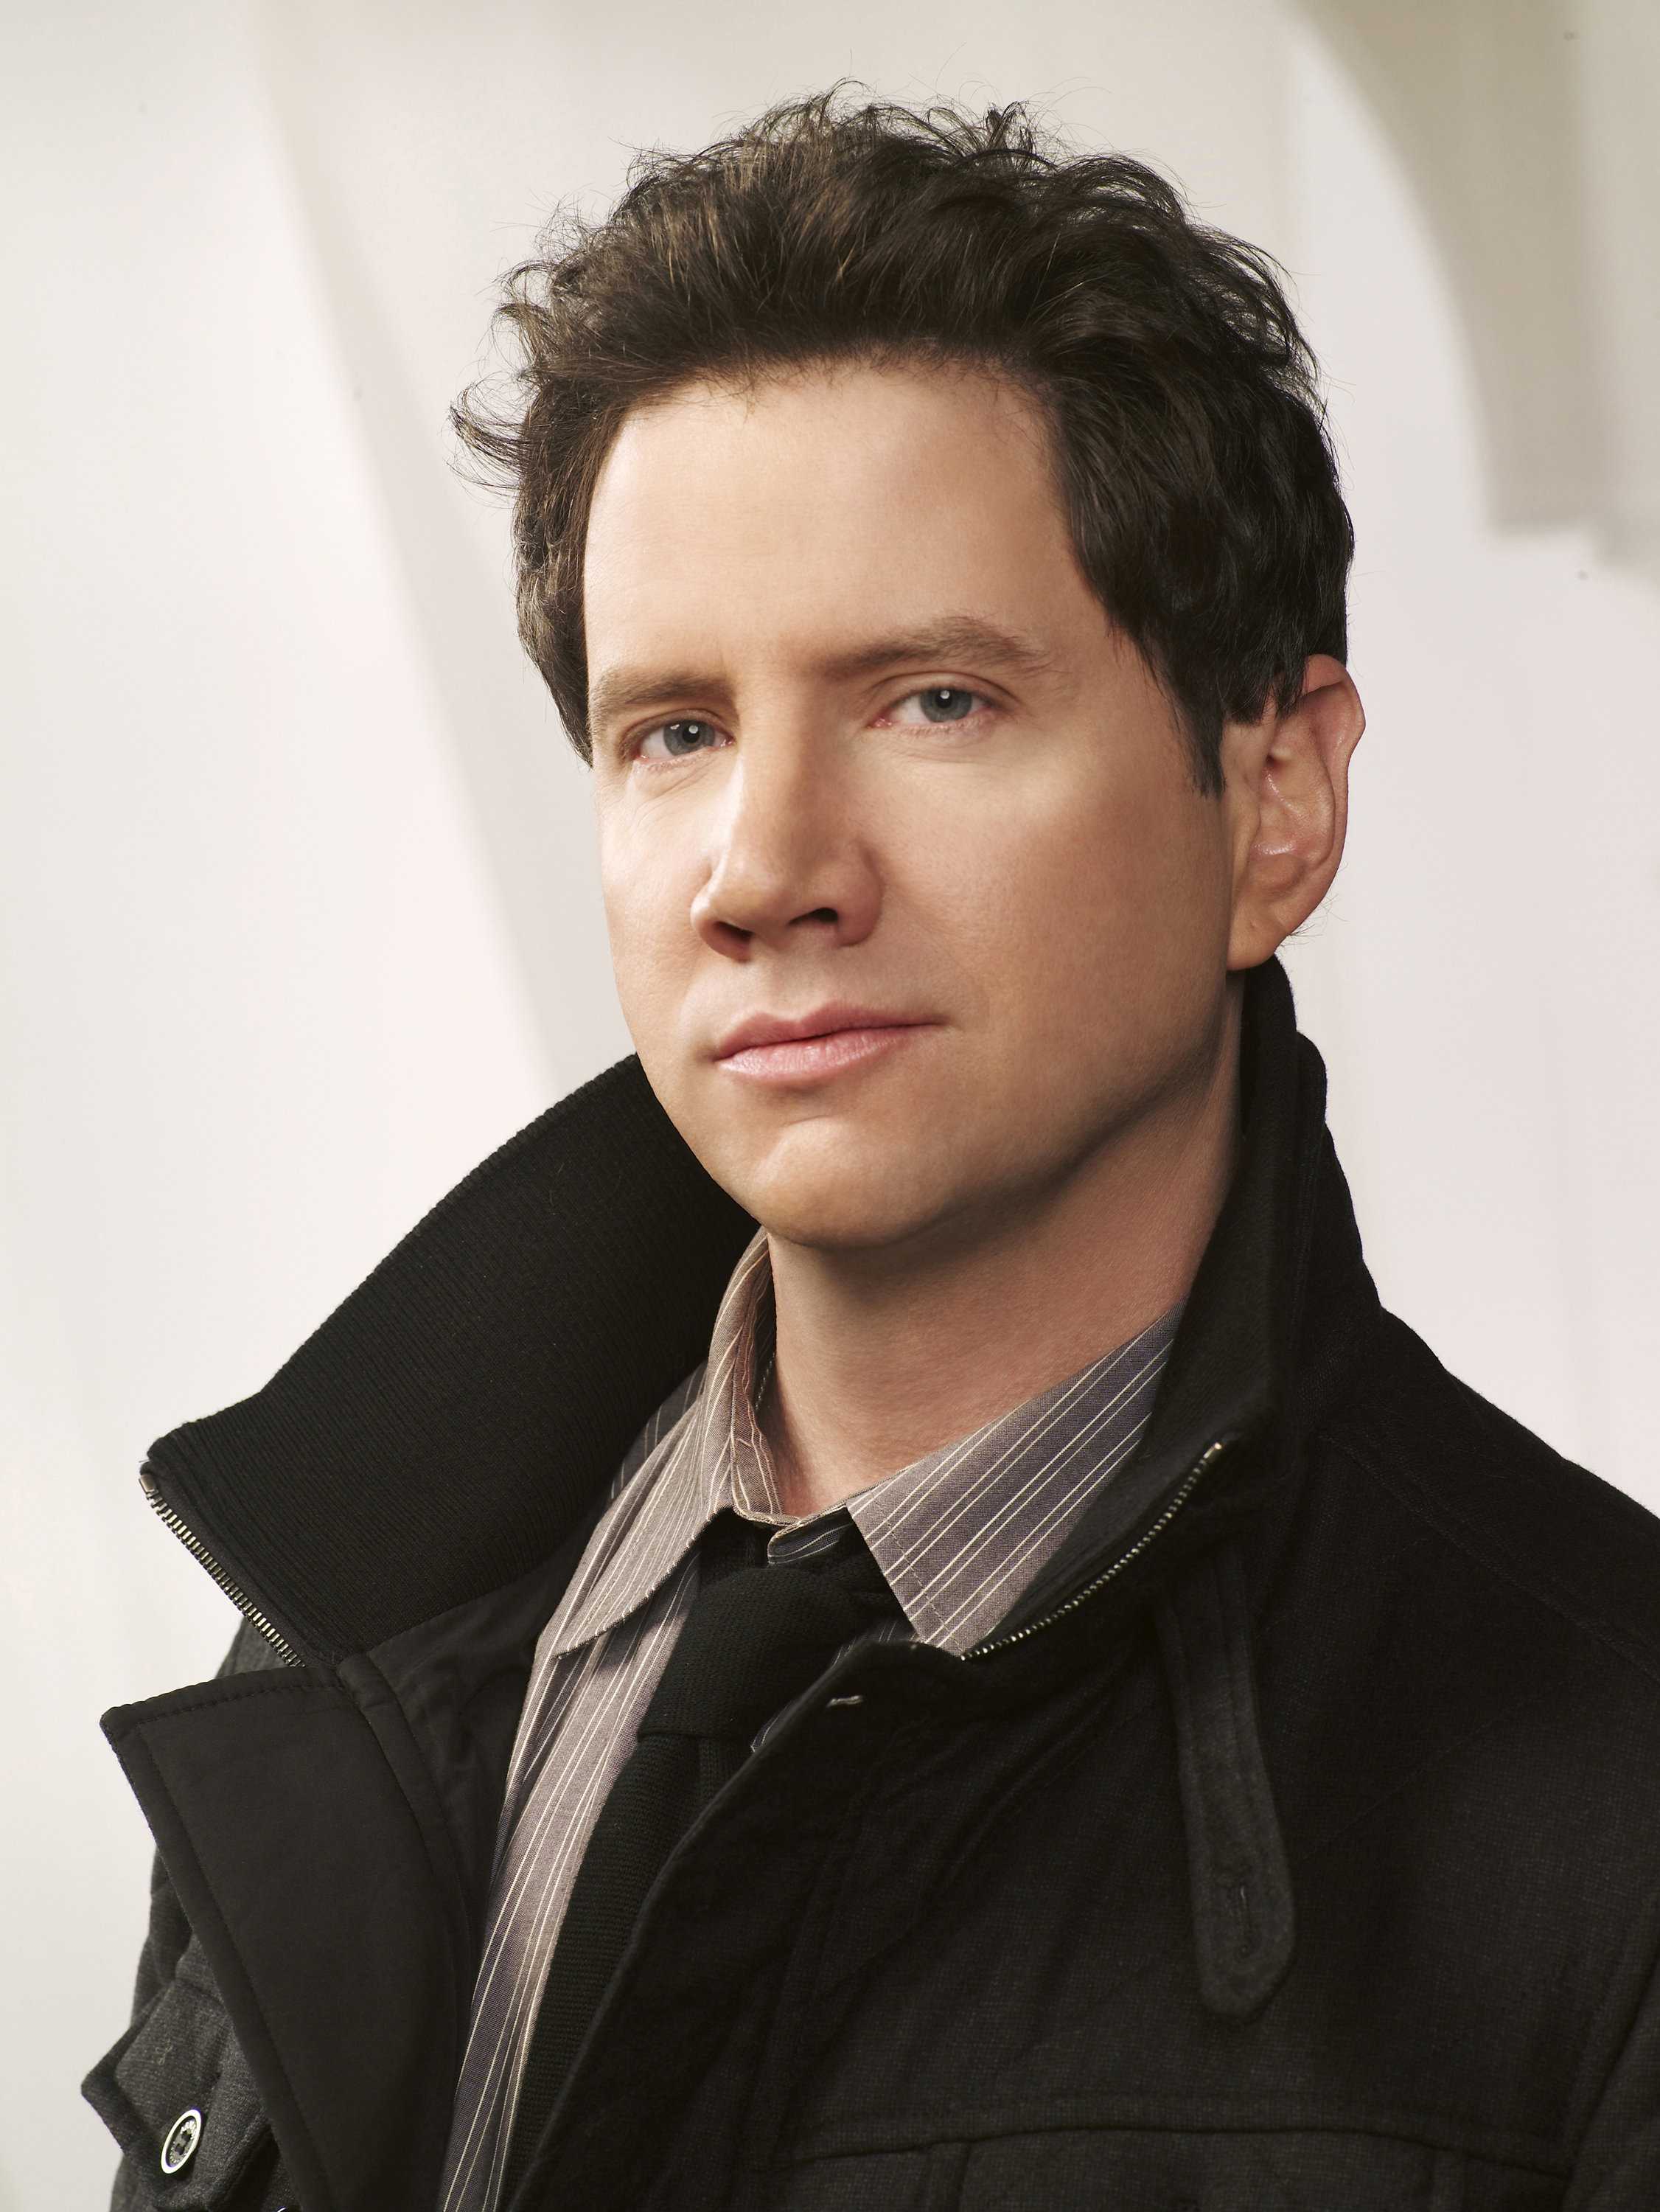 jamie-kennedy-images